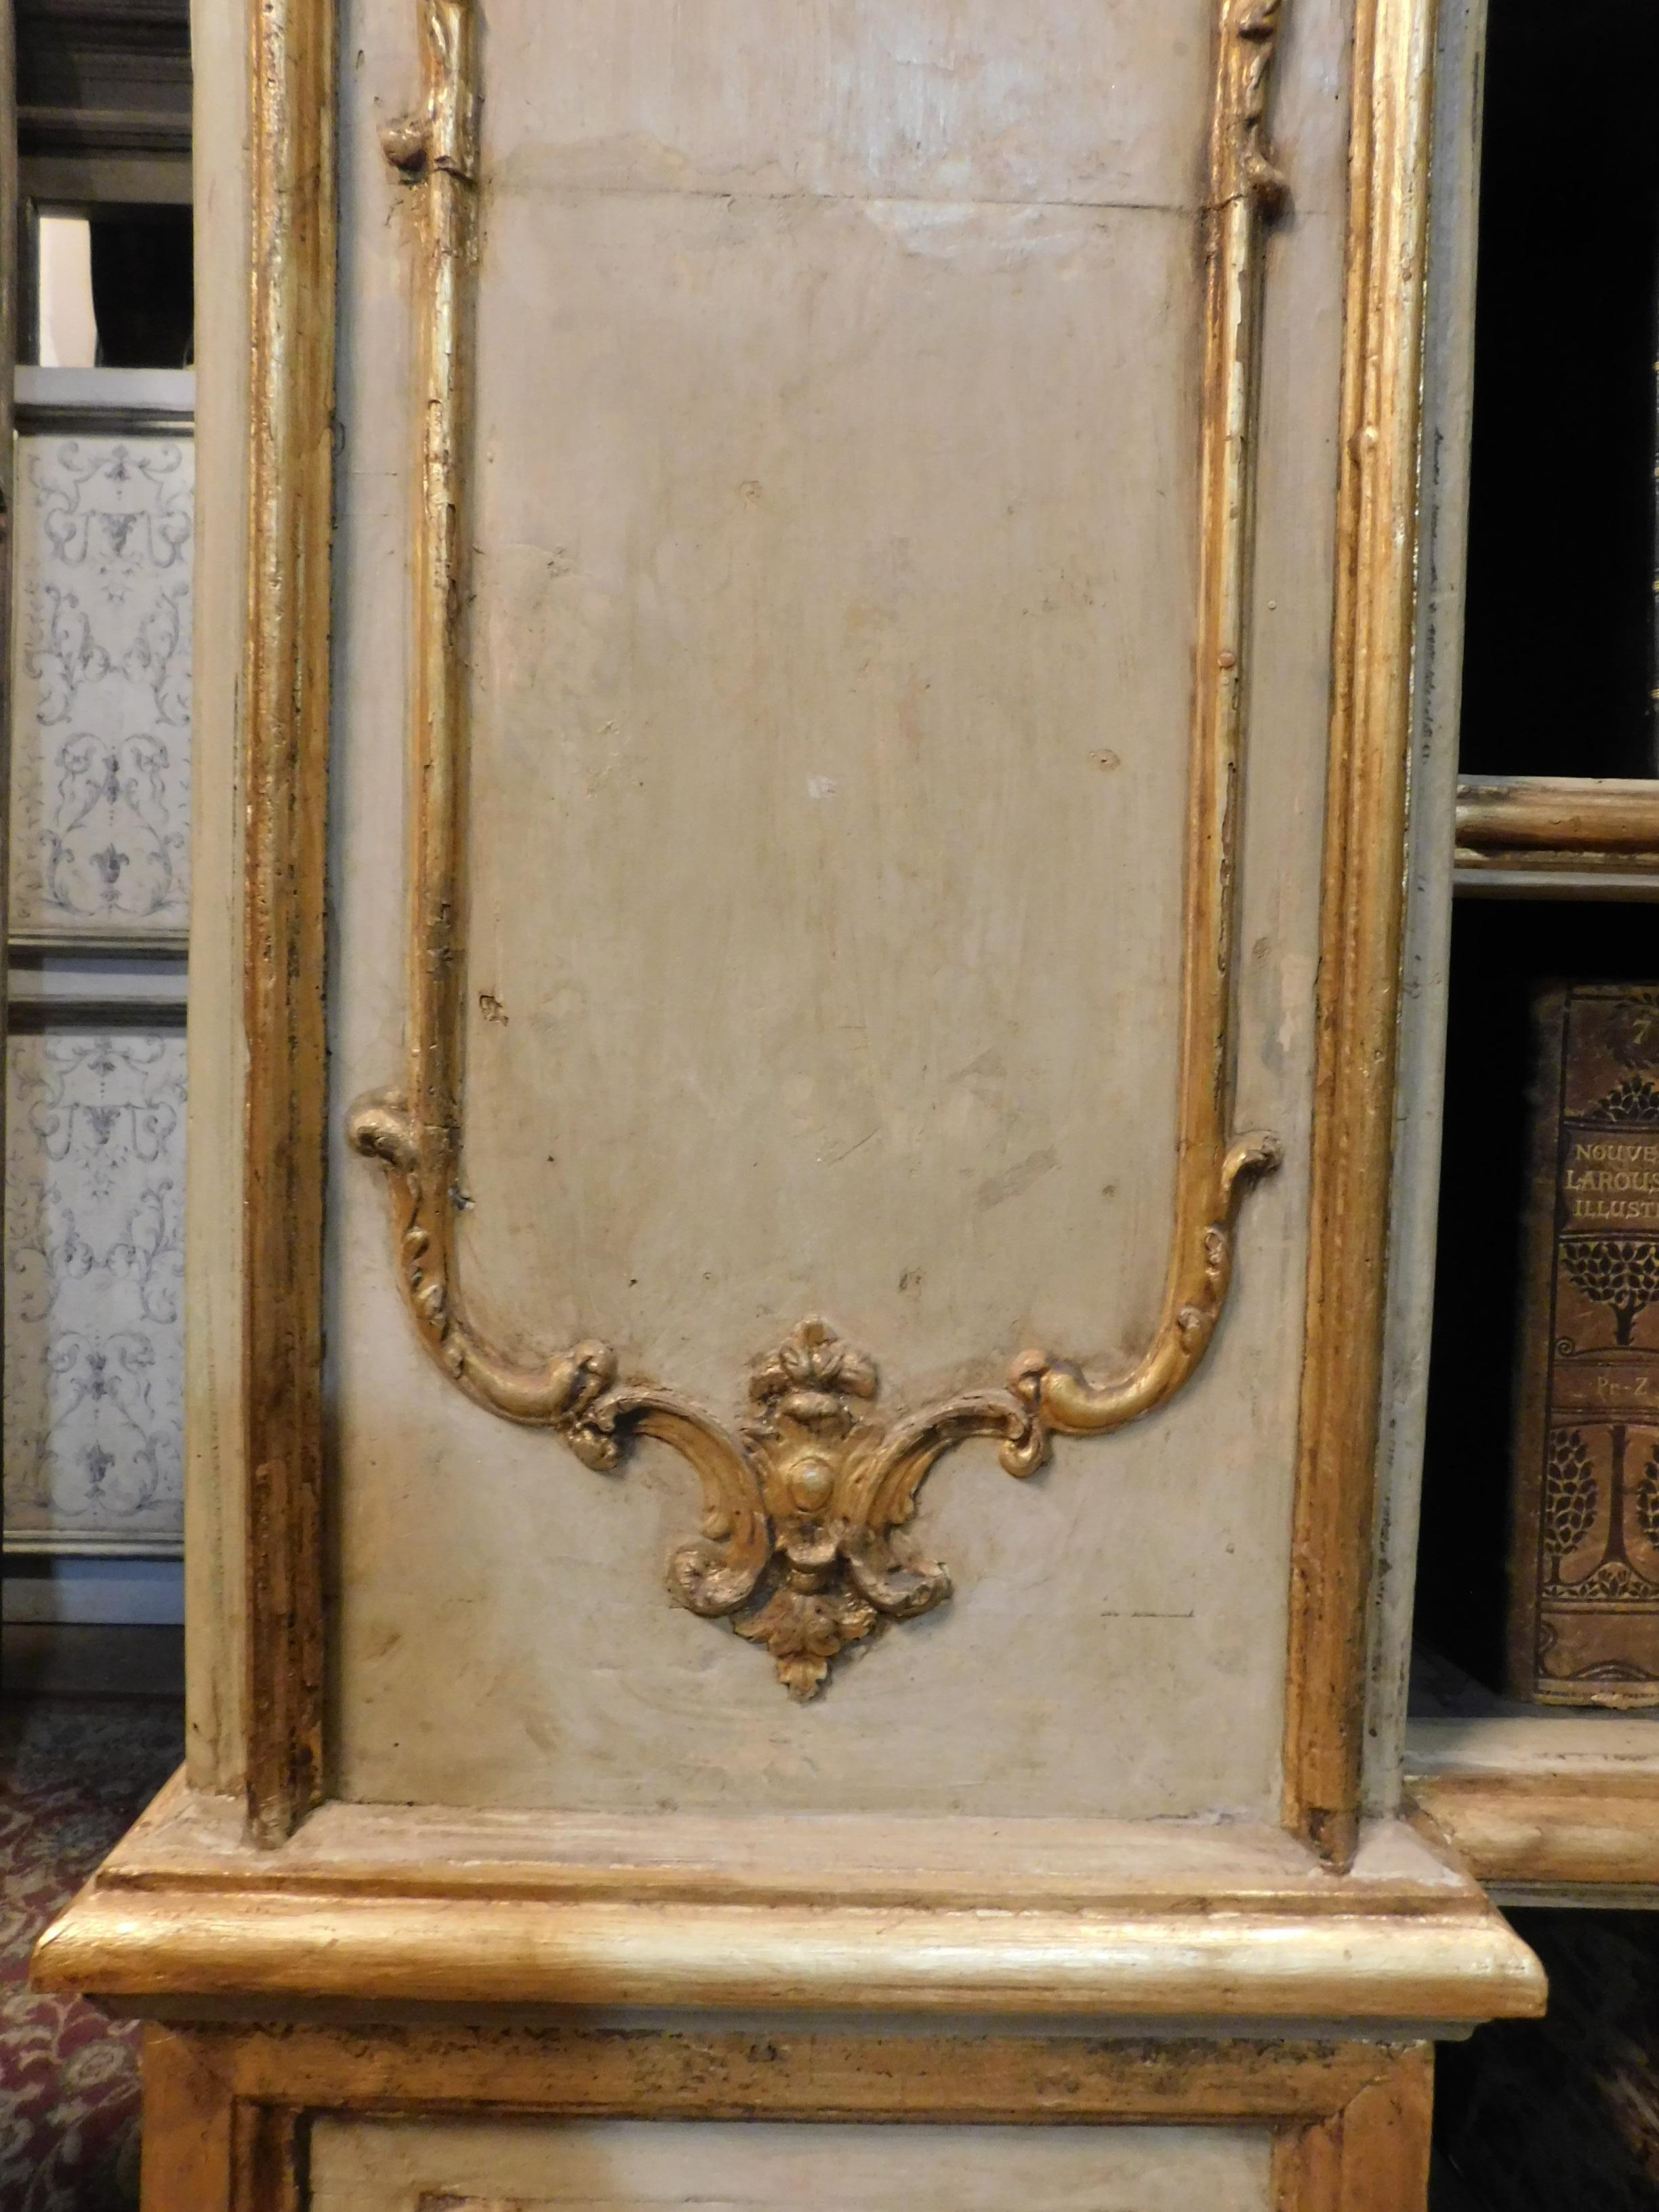 Hand-Carved Antique Lacquered Gilded Bookcase, Carved Columns & Friezes, 19th Century Italy For Sale